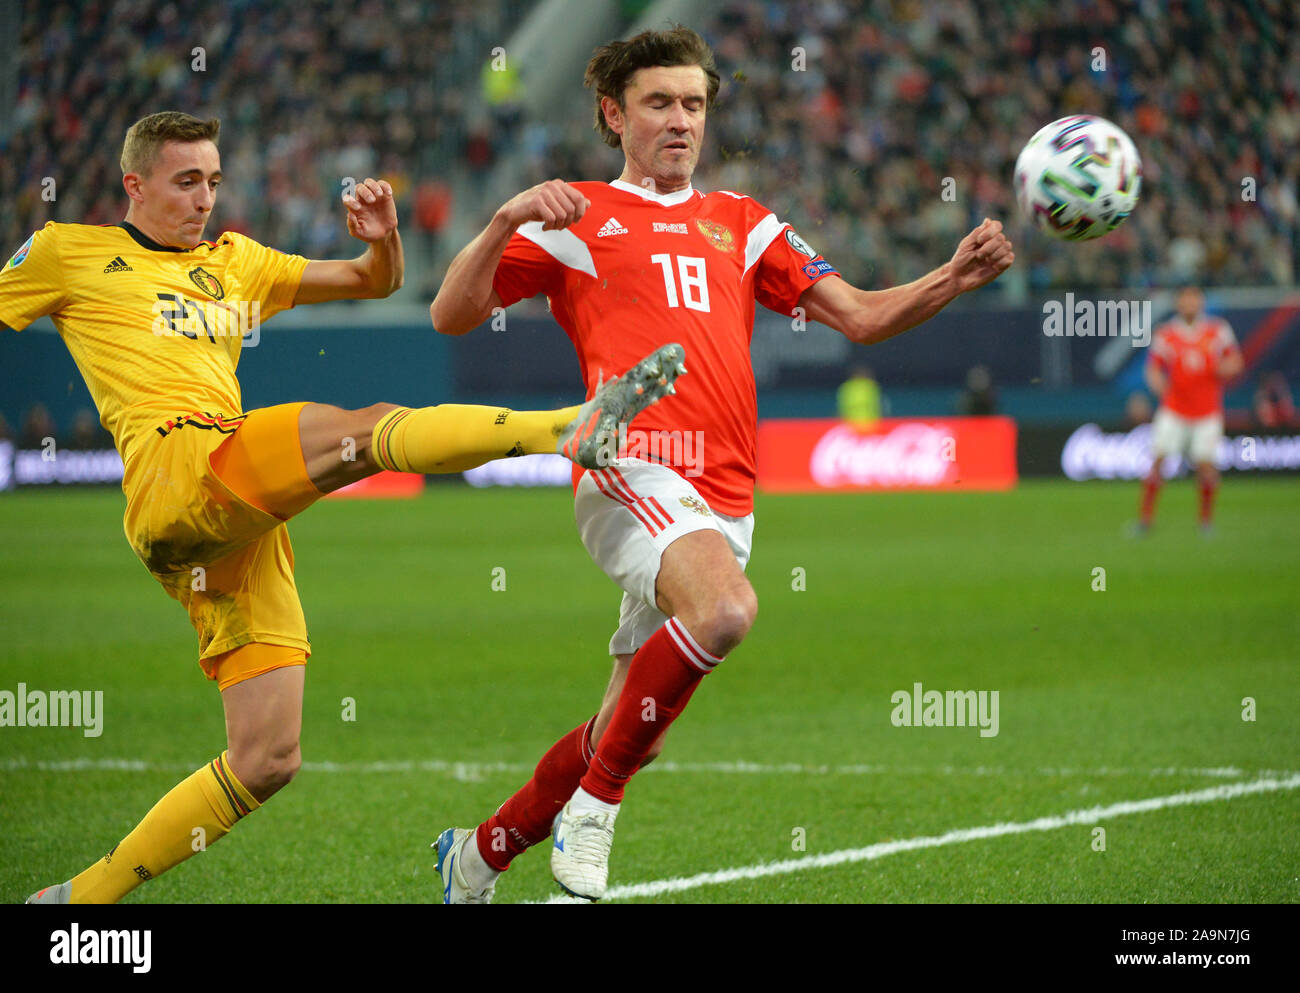 St. Petersburg, Russia. 16th Nov, 2019. Russia, St. Petersburg, November 16, 2019. Belgian national team players Timothy Kastan and Russian national team Yuri Zhirkov (left to right) in the qualifying match of the 2020 European Football Championship between the national teams of Russia and Belgium. Credit: Andrey Pronin/ZUMA Wire/Alamy Live News Stock Photo